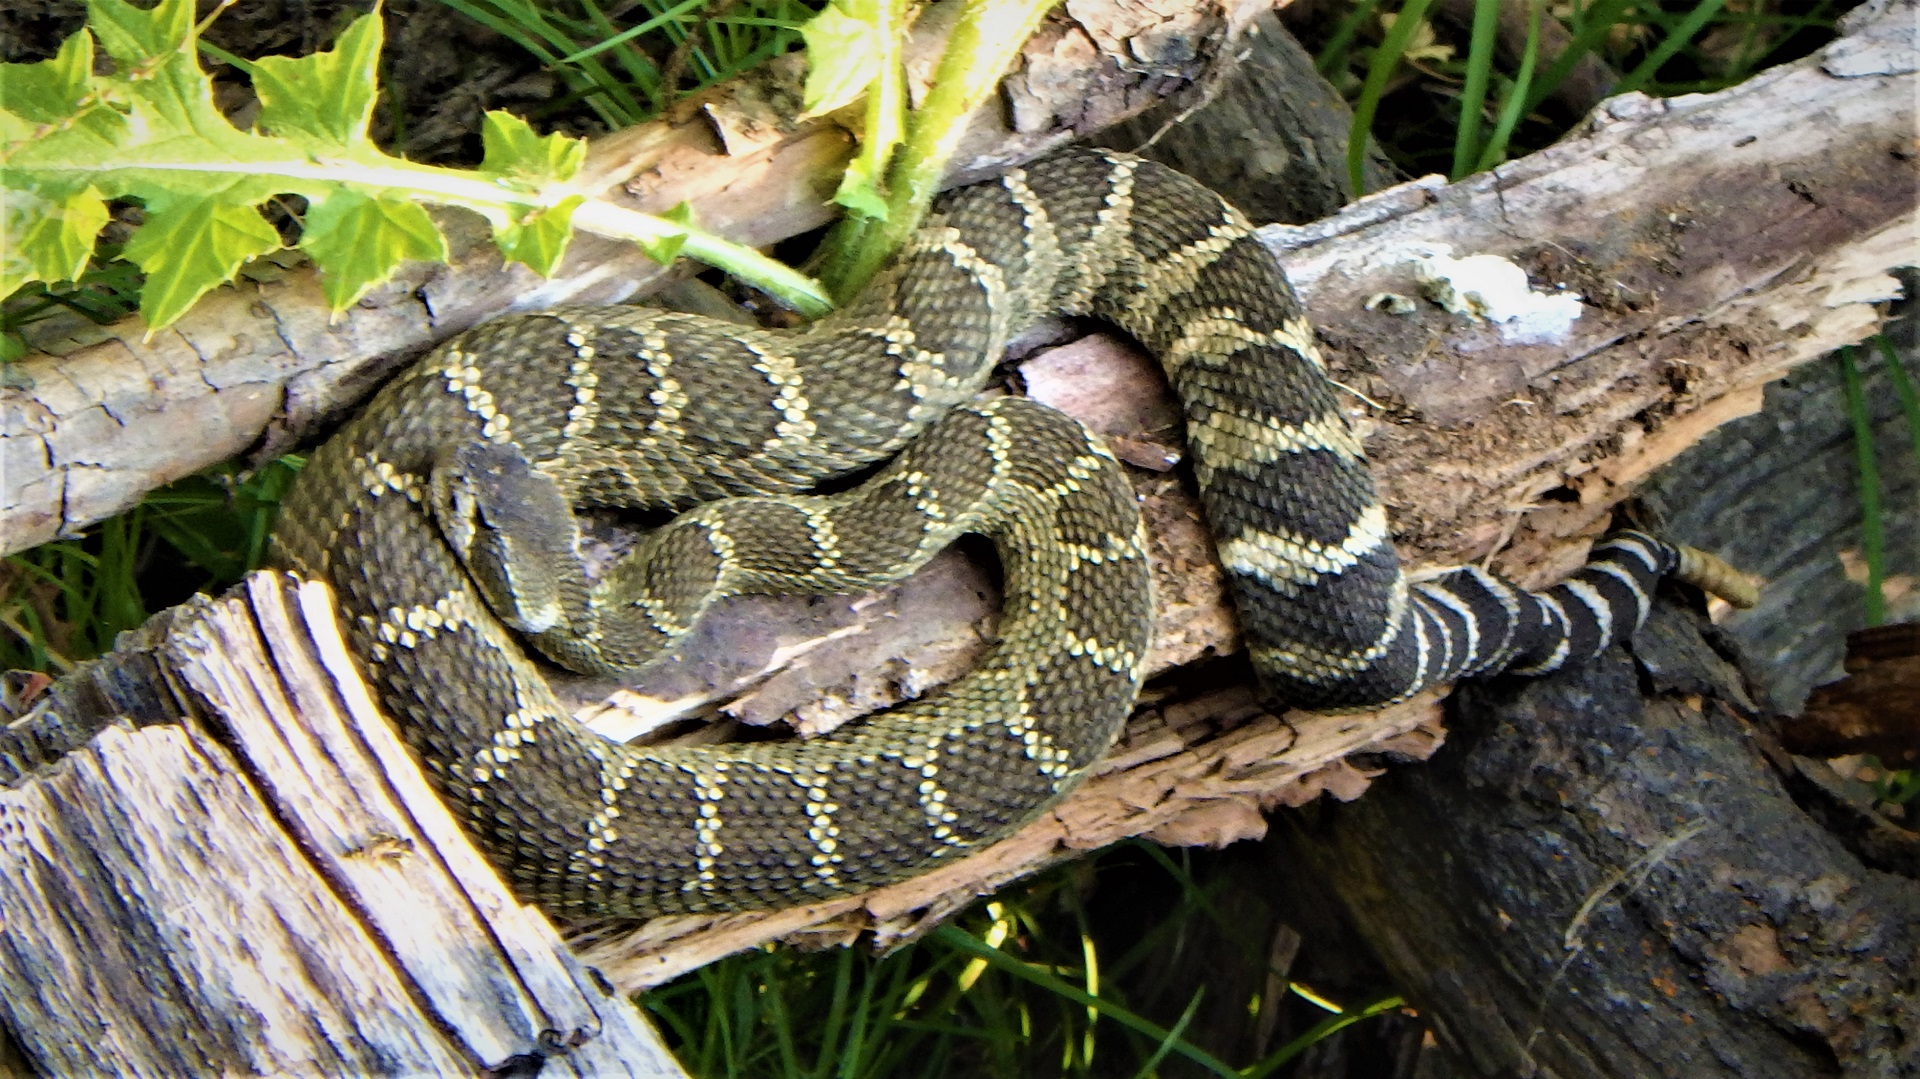 A yellow and brown striped snake curled up on a piece of dead wood